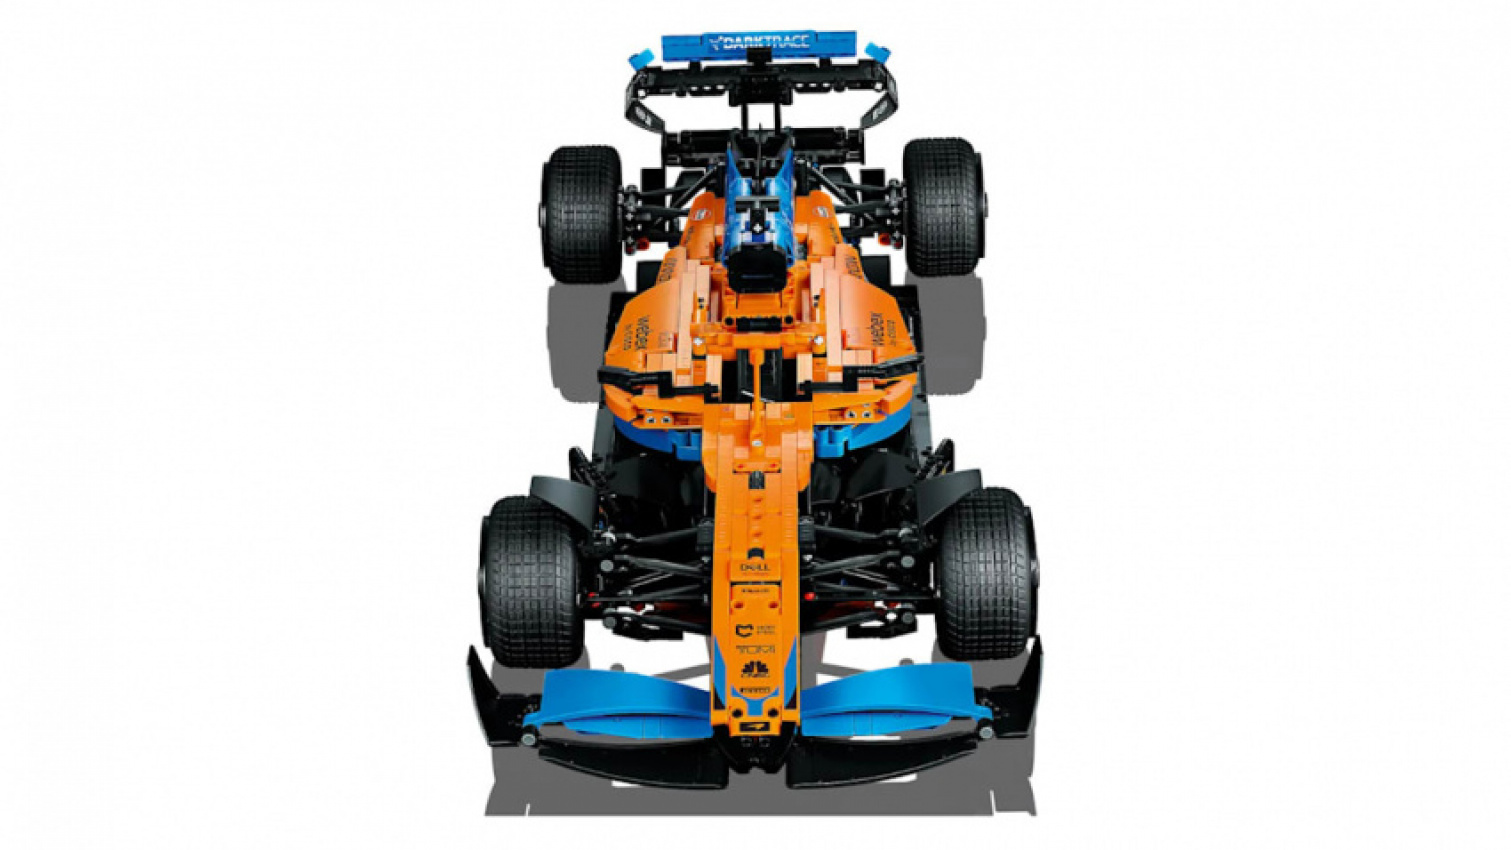 autos, cars, mclaren, toys/games, lego, motorsports, racing vehicles, the 2022 mclaren f1 car can be yours, in lego form